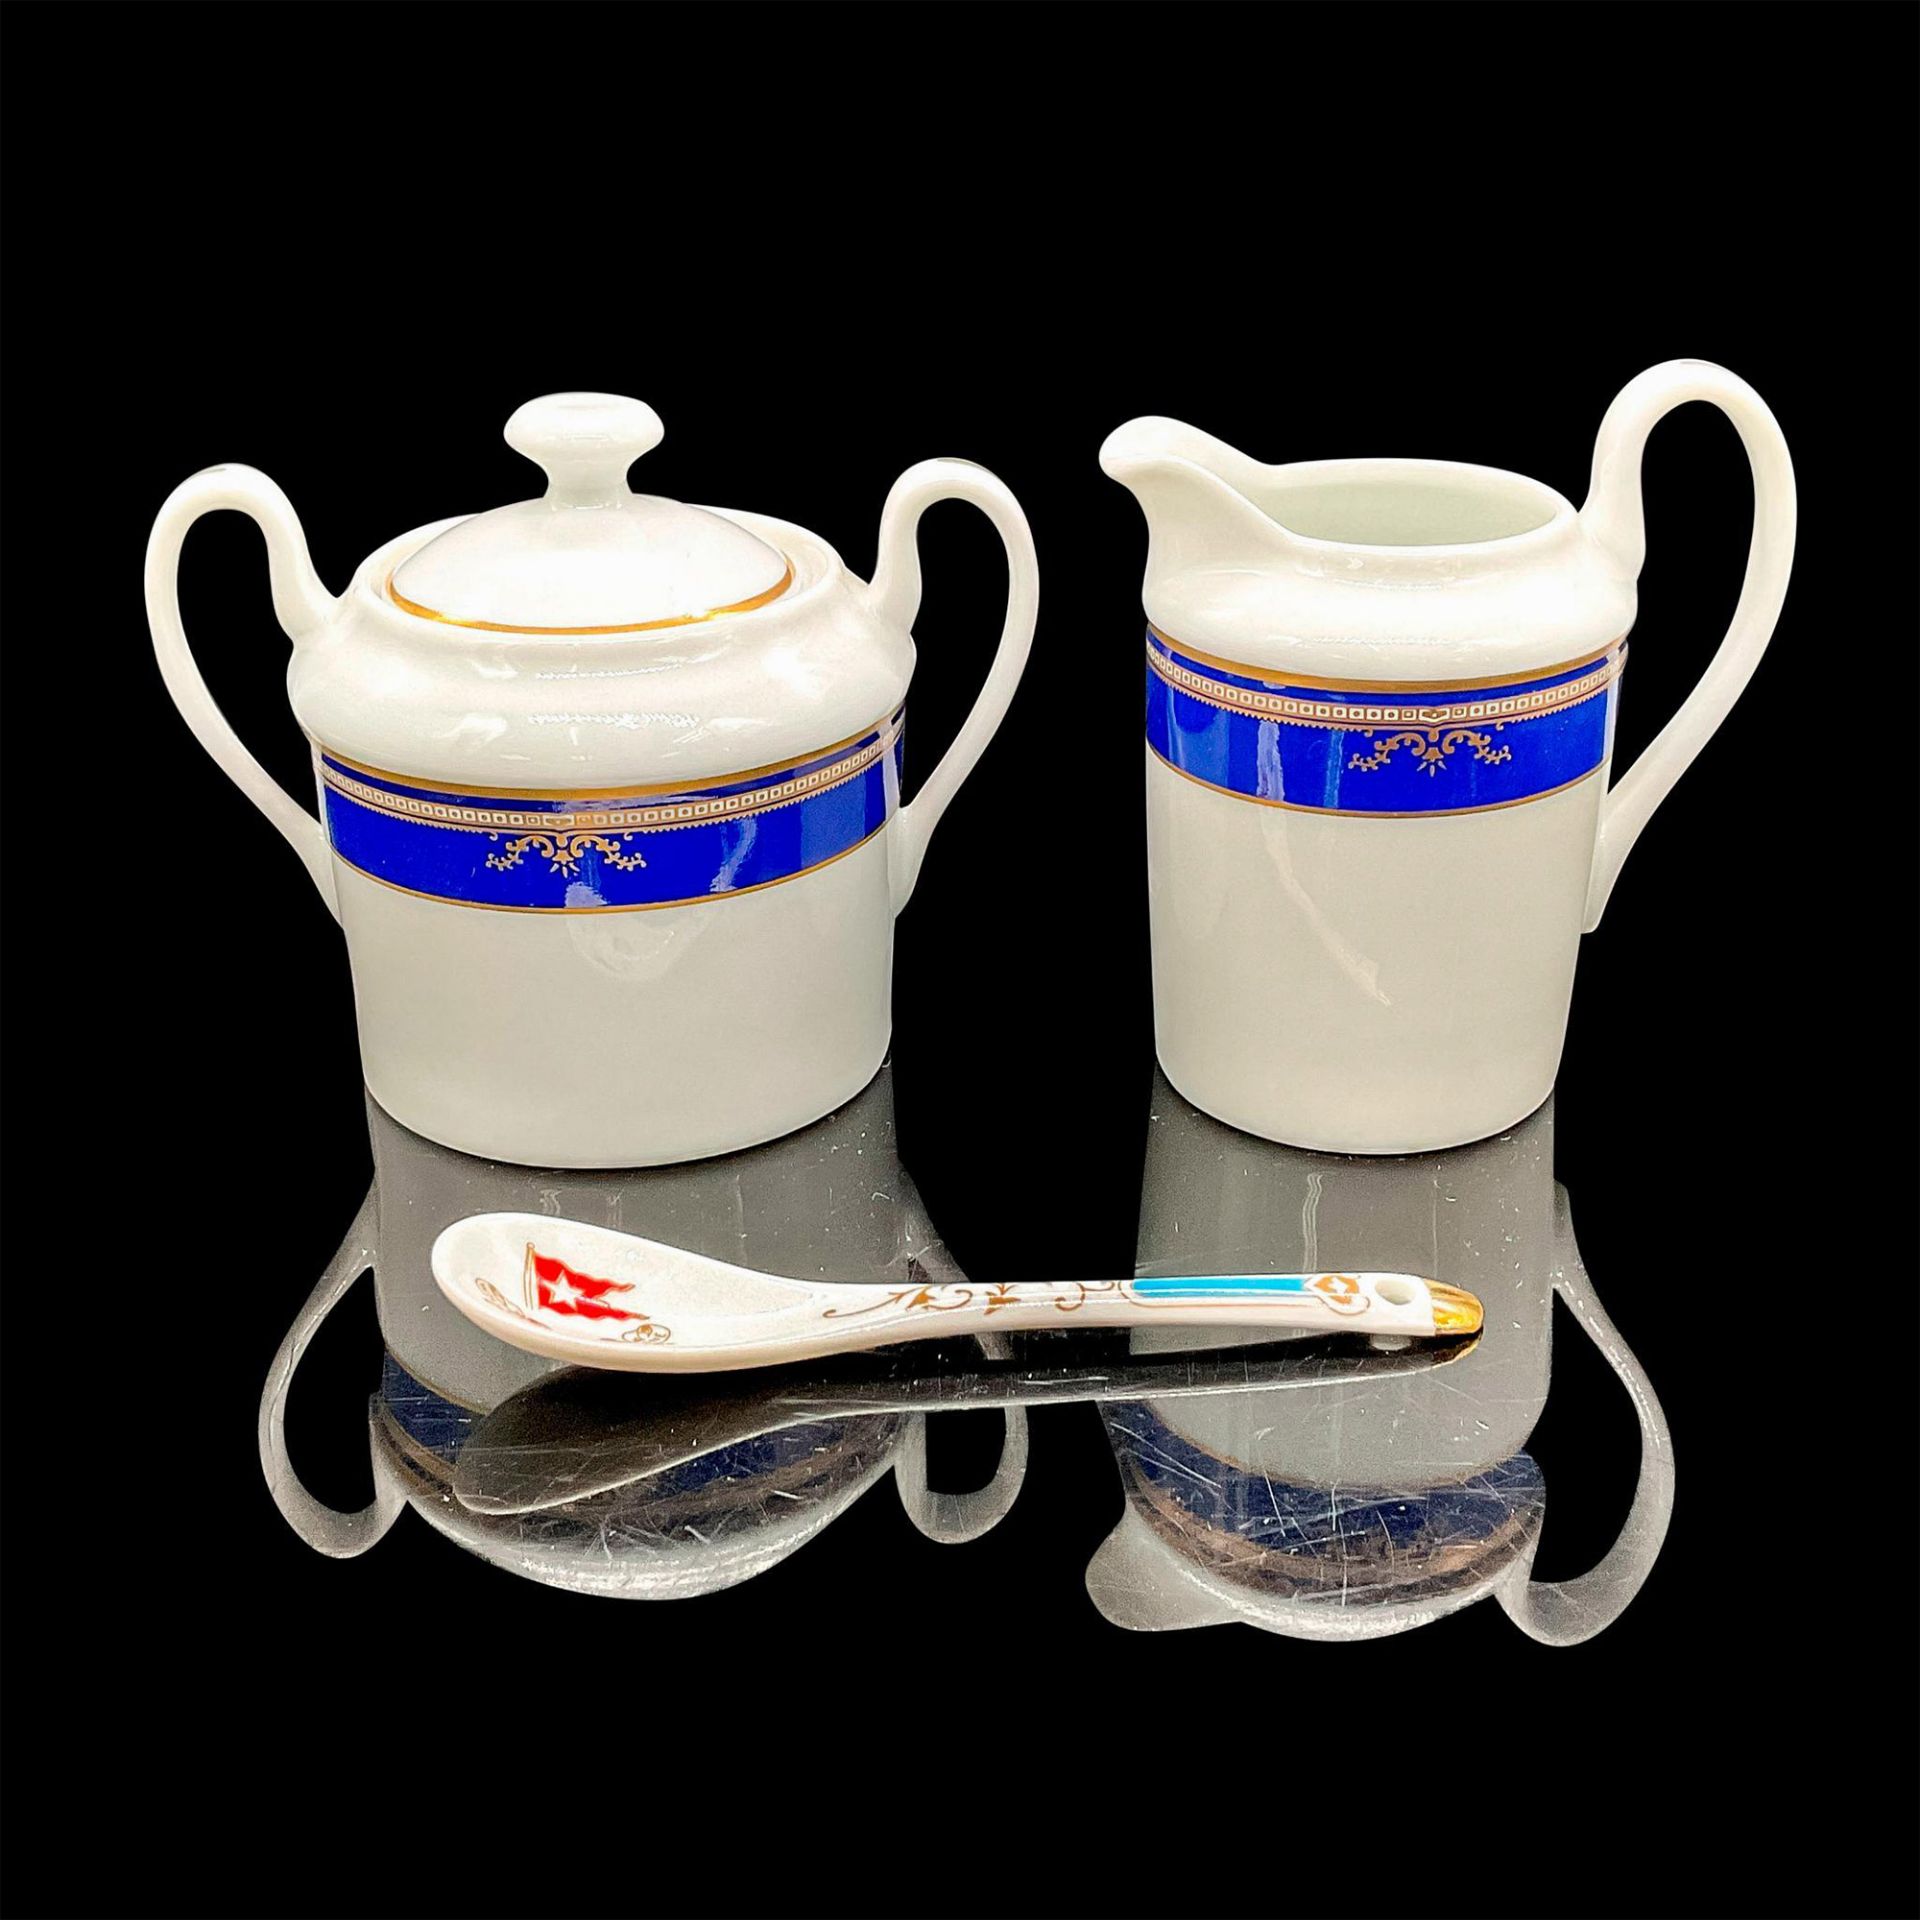 6pc Tea Serving Set, Queen Mary and Titanic Replicas - Image 14 of 16